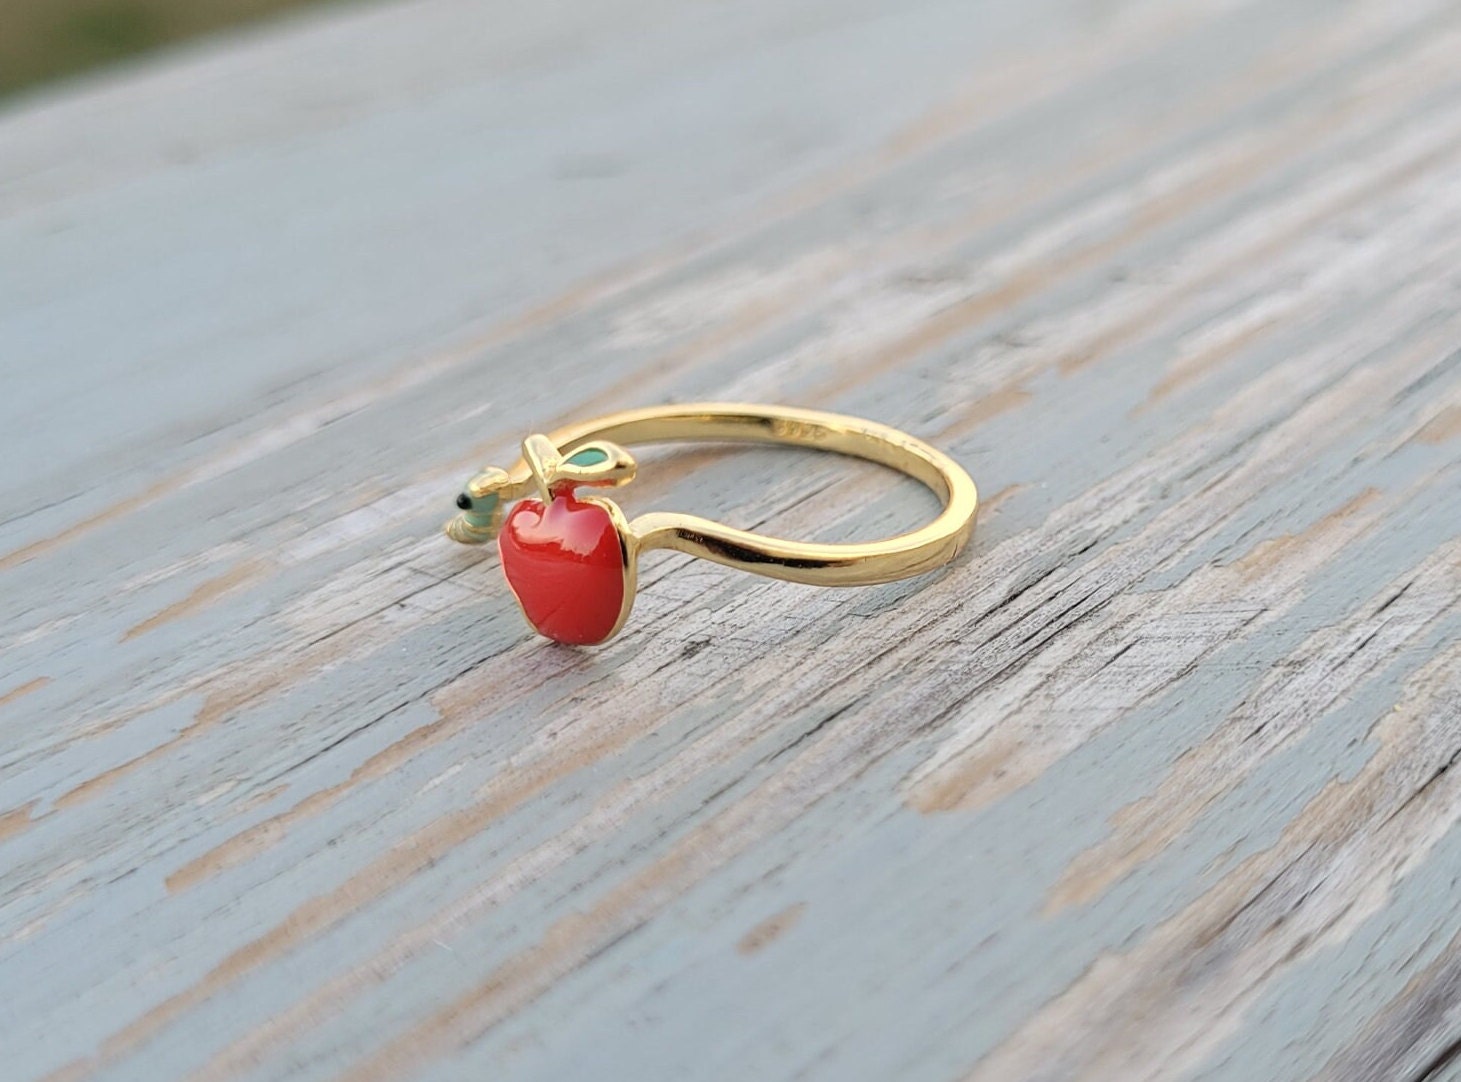 Apple & Worm Ring. Adjustable. Gift for Birthday, Christmas, Gifts for Her,  Gift for Mom, Kids. Sterling Silver - Etsy